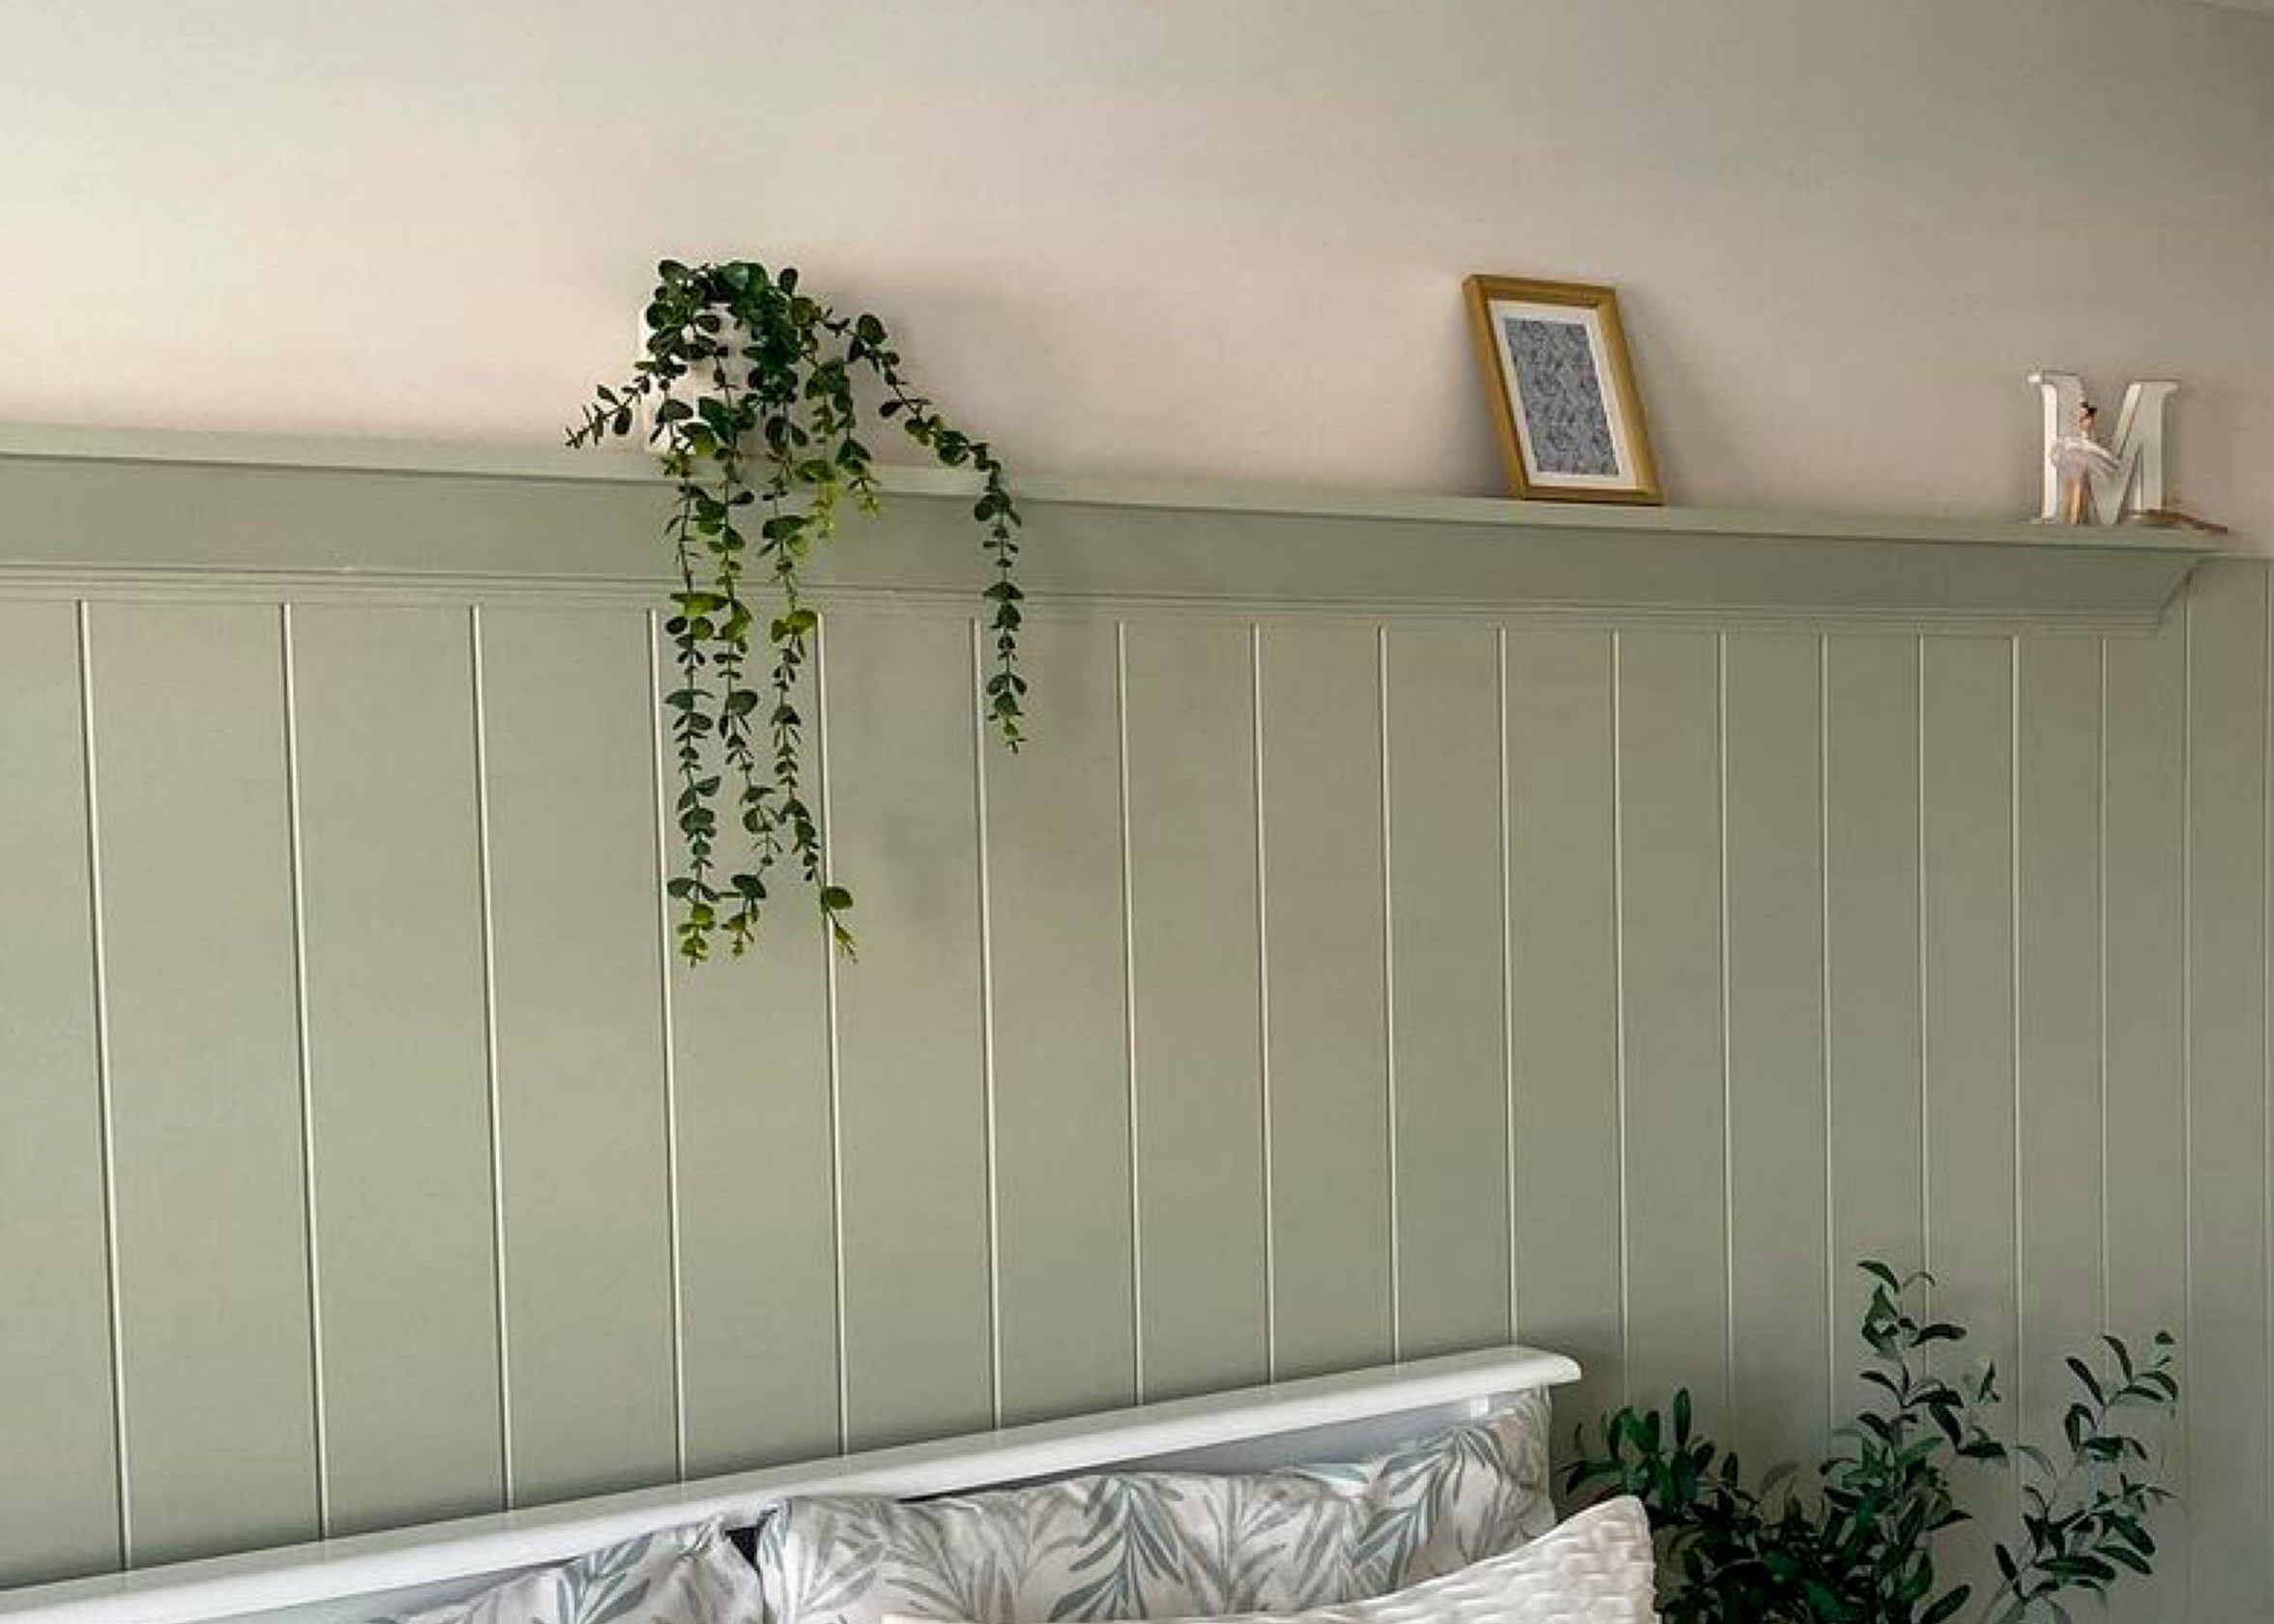 tongue and groove wall panels in bedroom